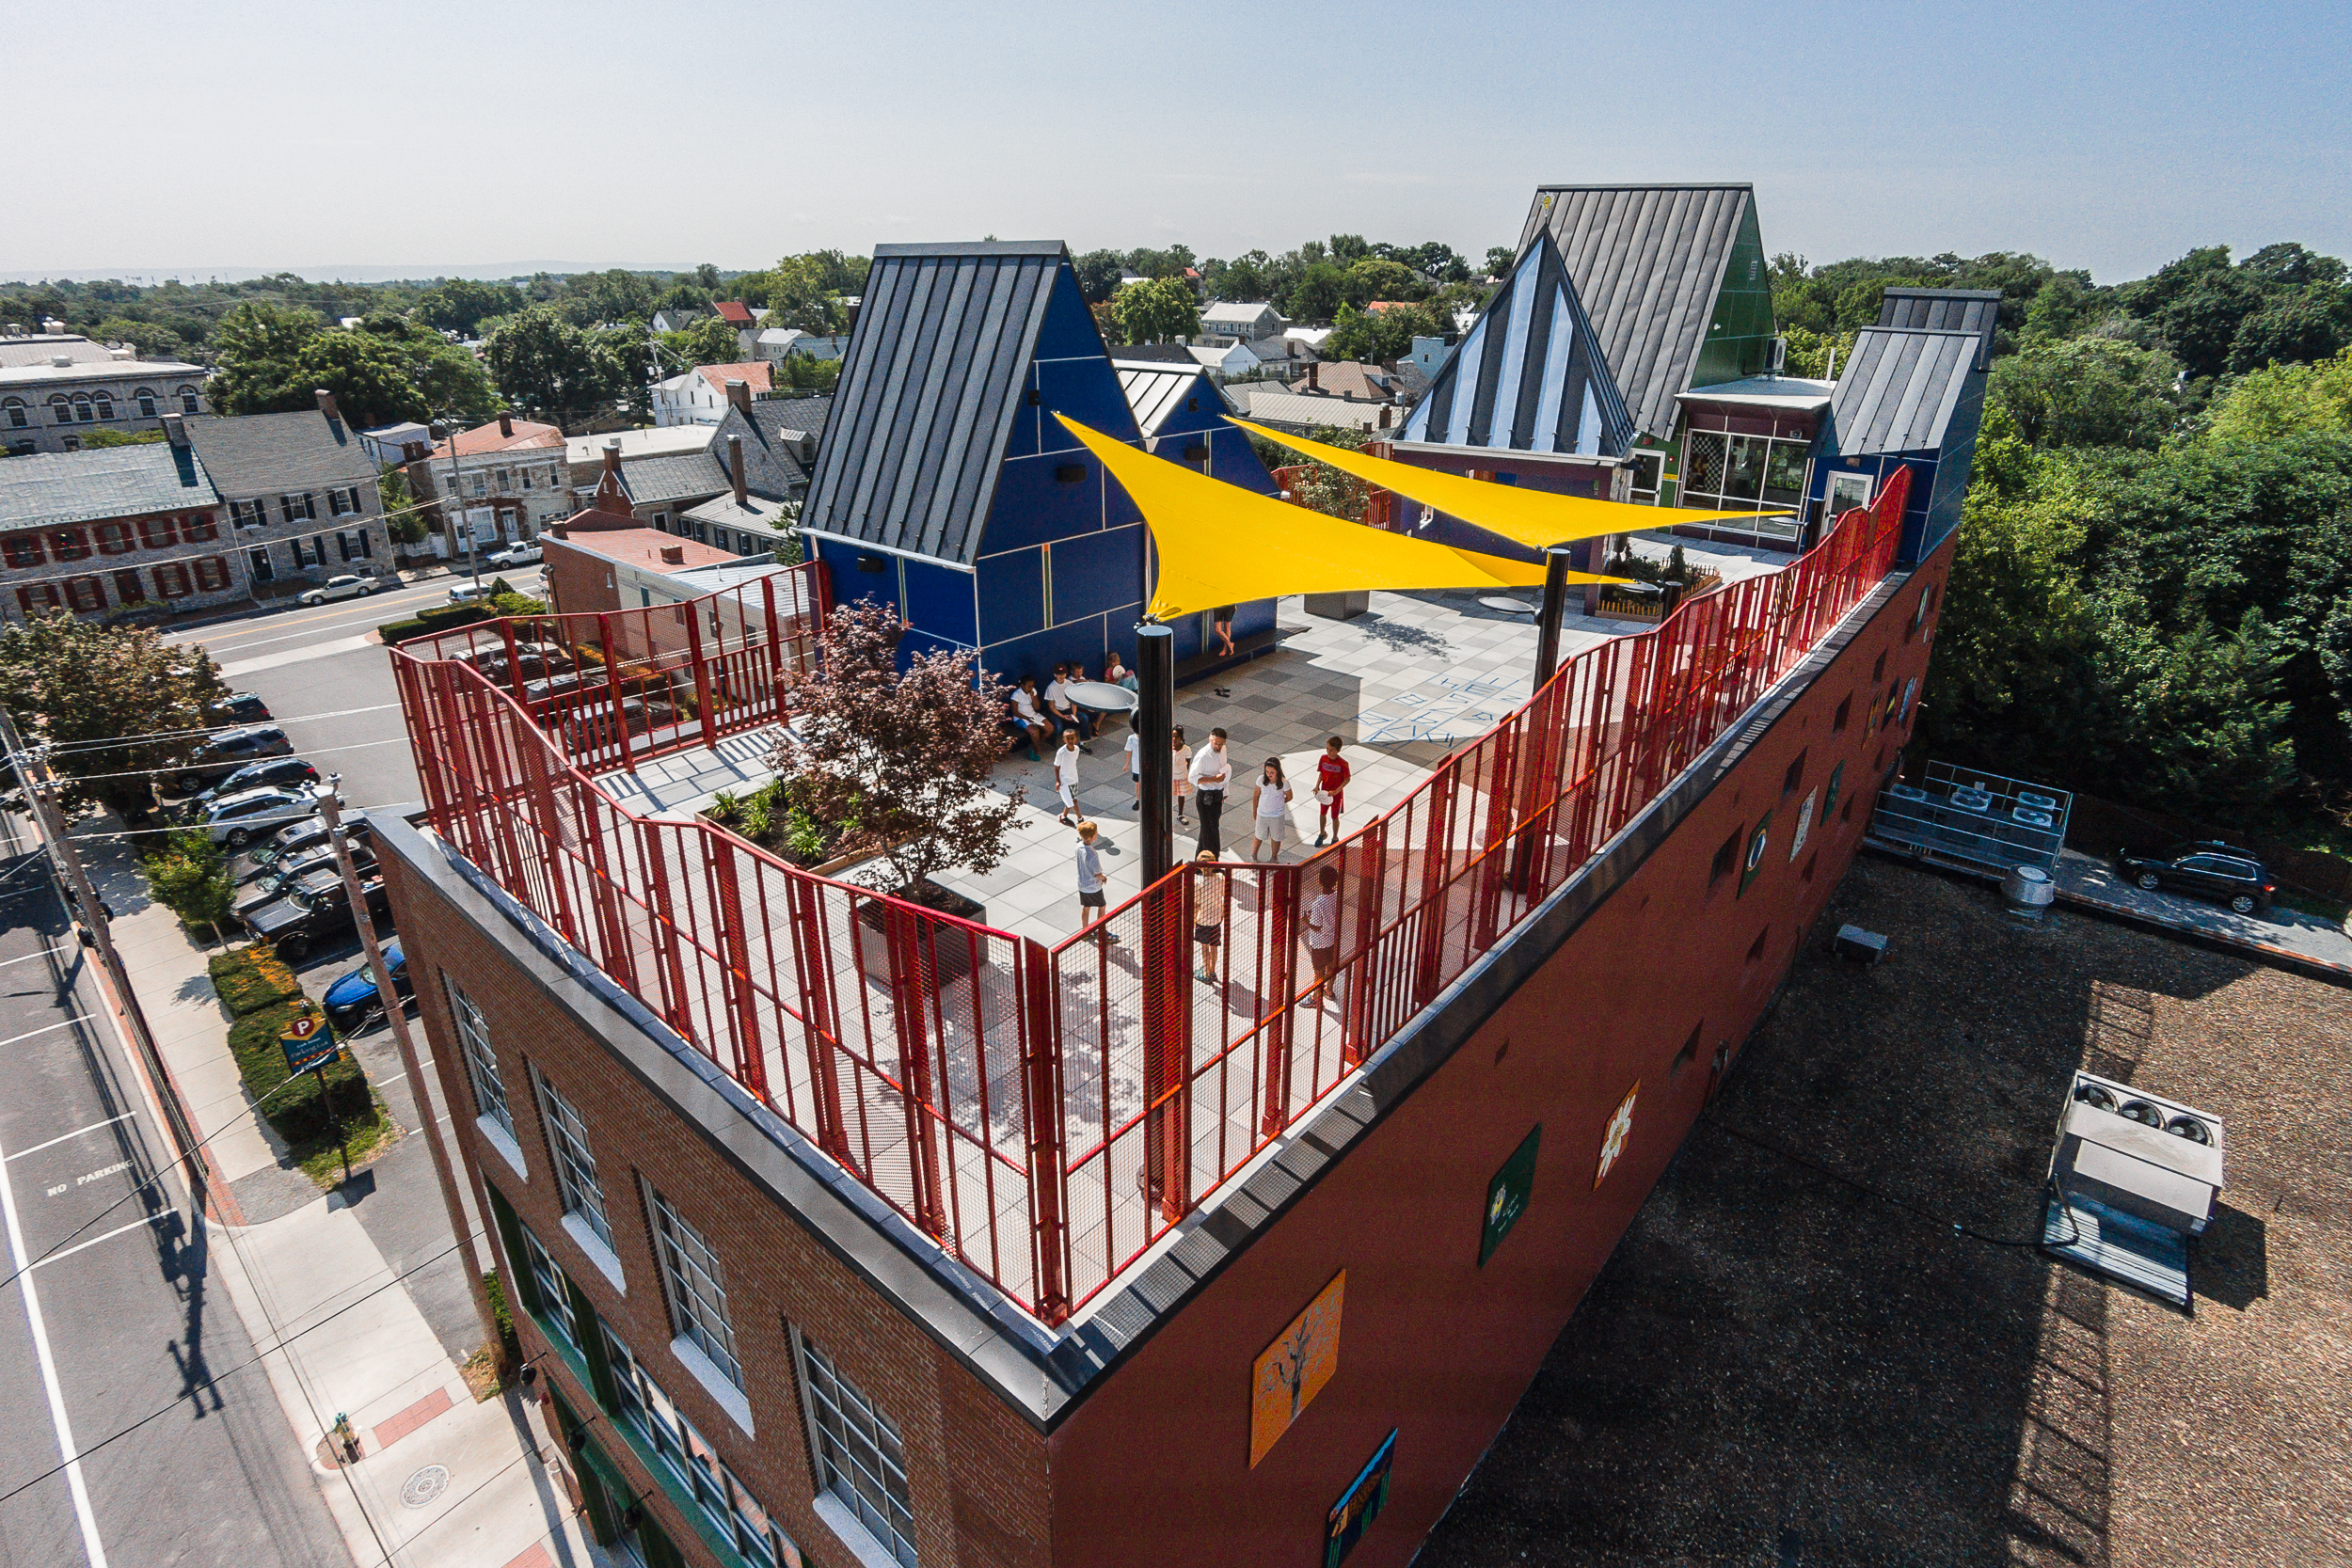 The new, very colorful rooftop of the Shenandoah Valley Discovery Museum in Old Town Winchester